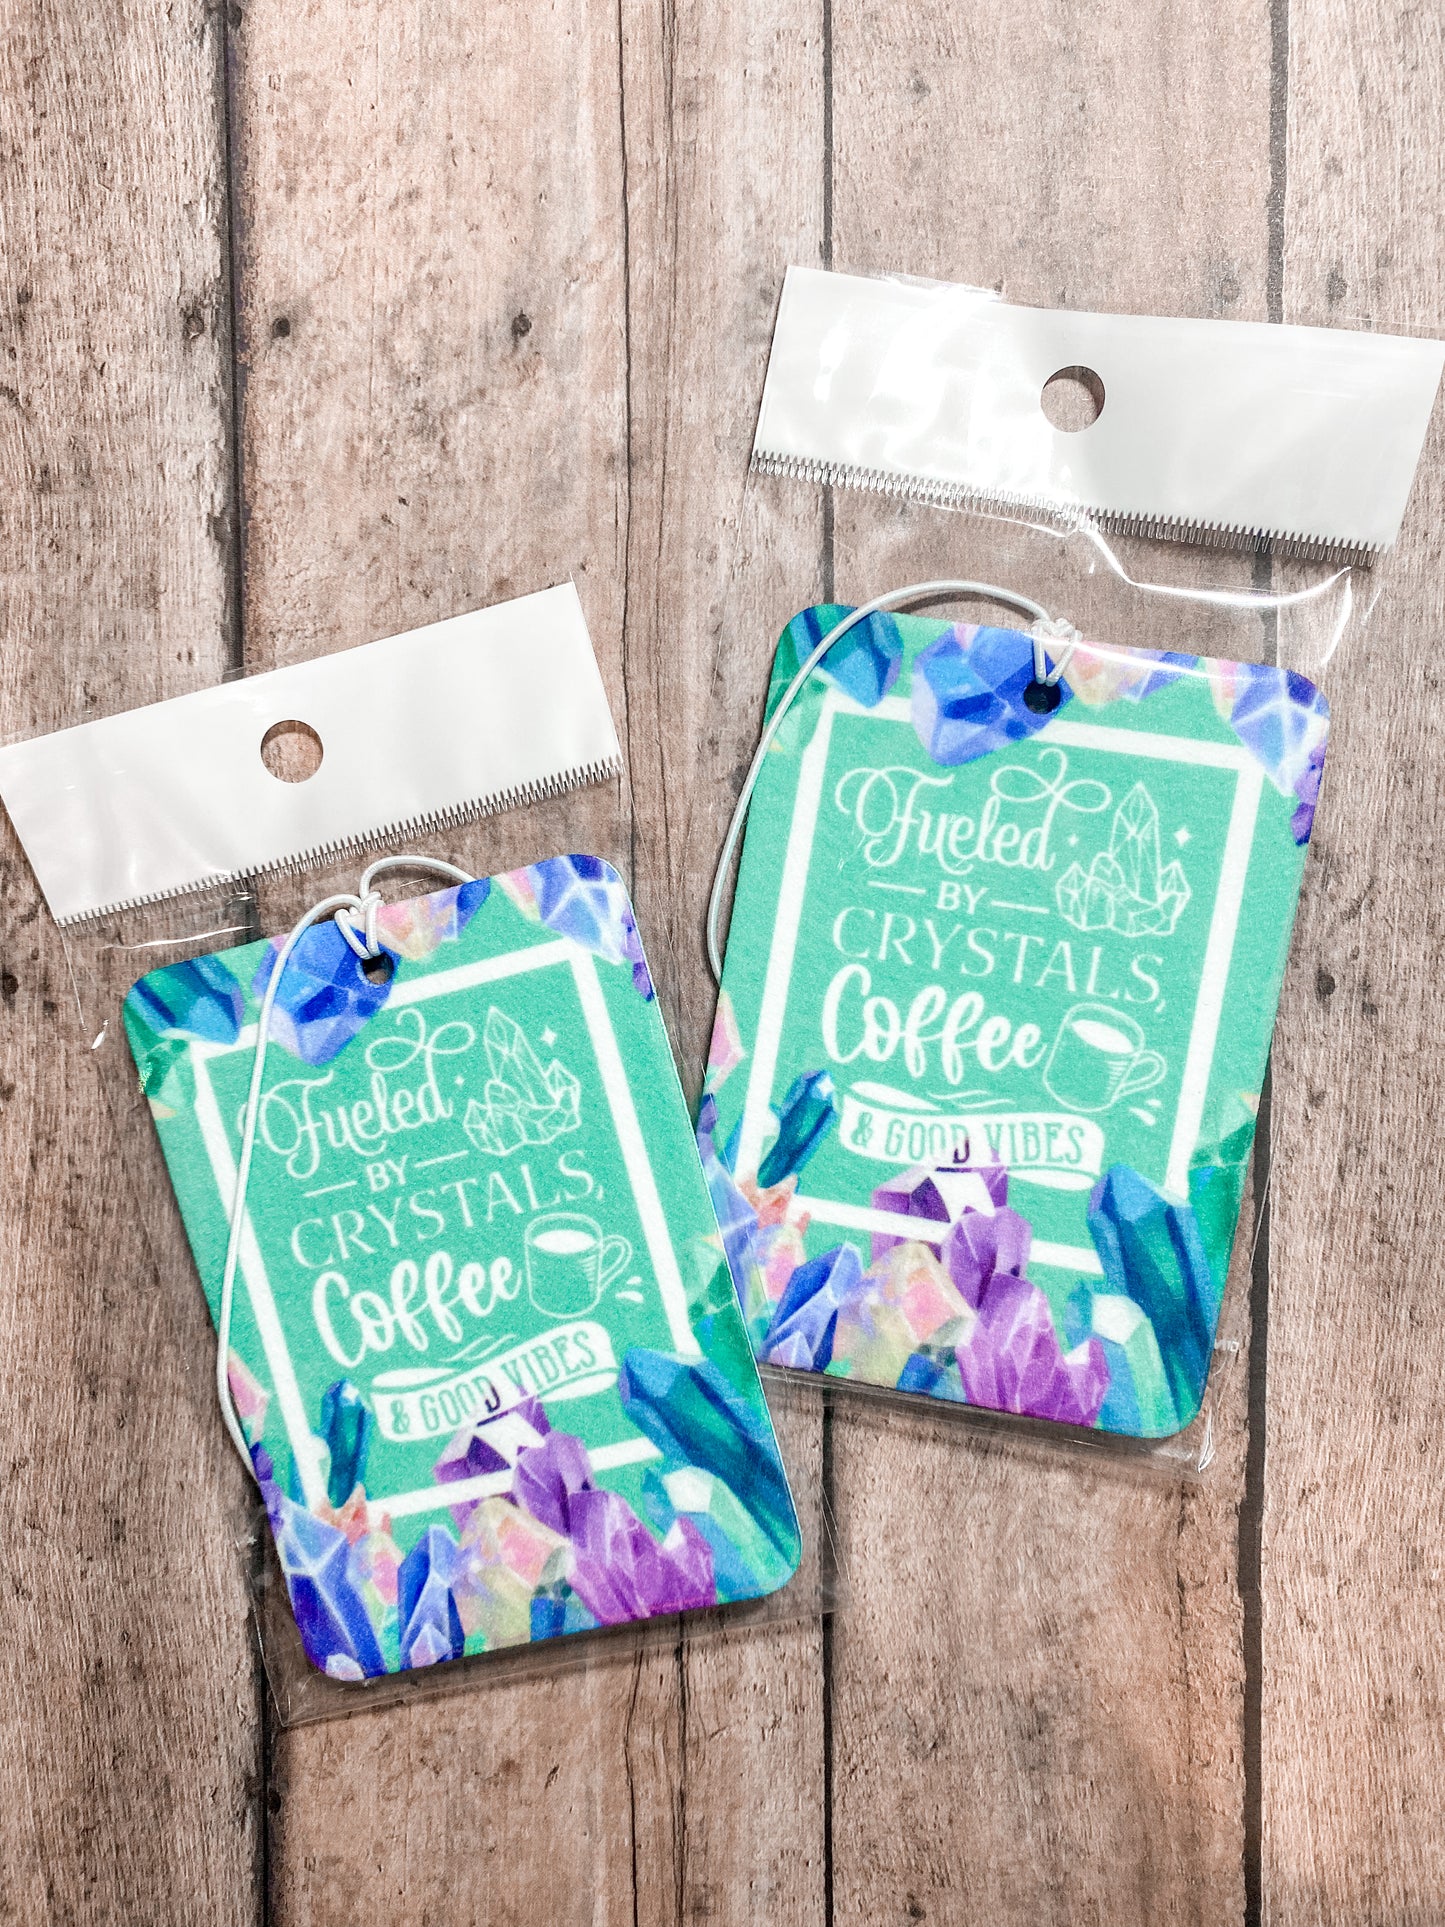 Fueled by Crystals, Coffee & Good Vibes Car Air Freshener | UNSCENTED 2 Pack